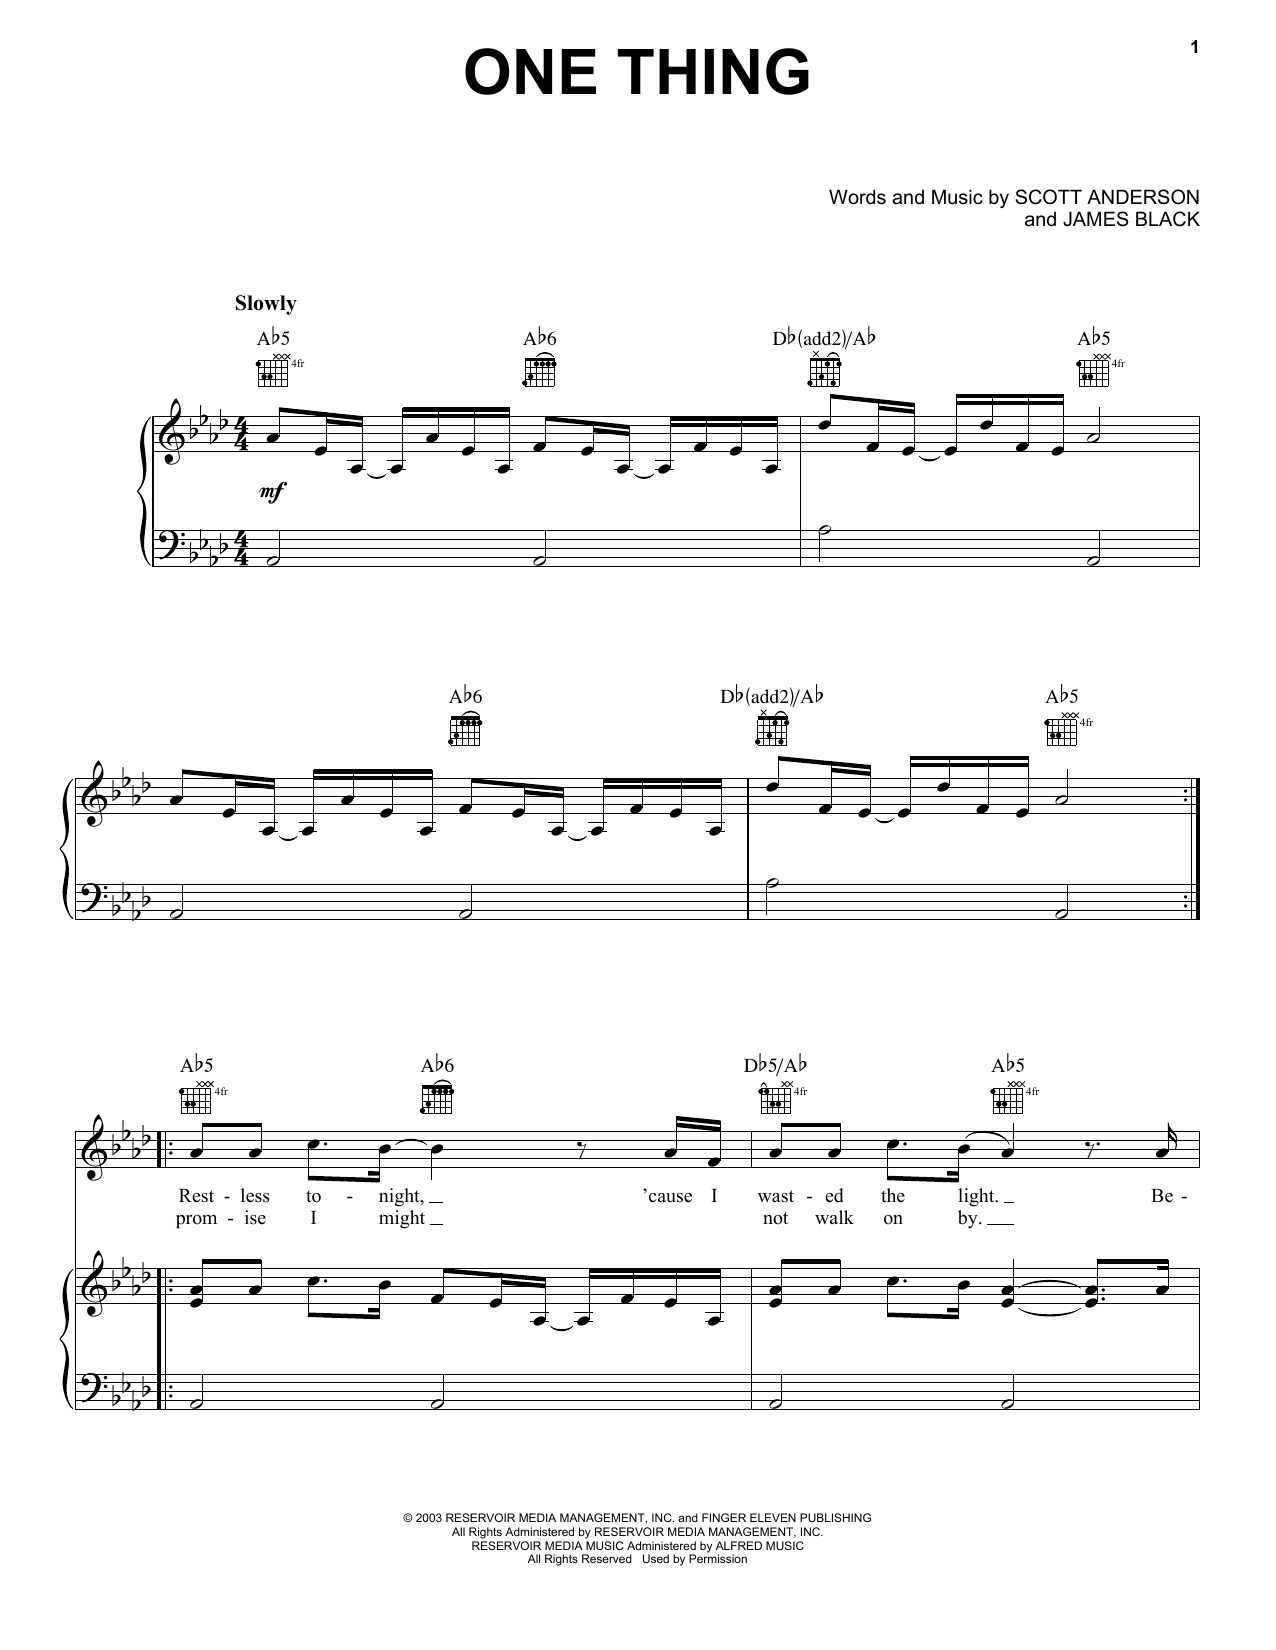 Download Finger Eleven One Thing Sheet Music